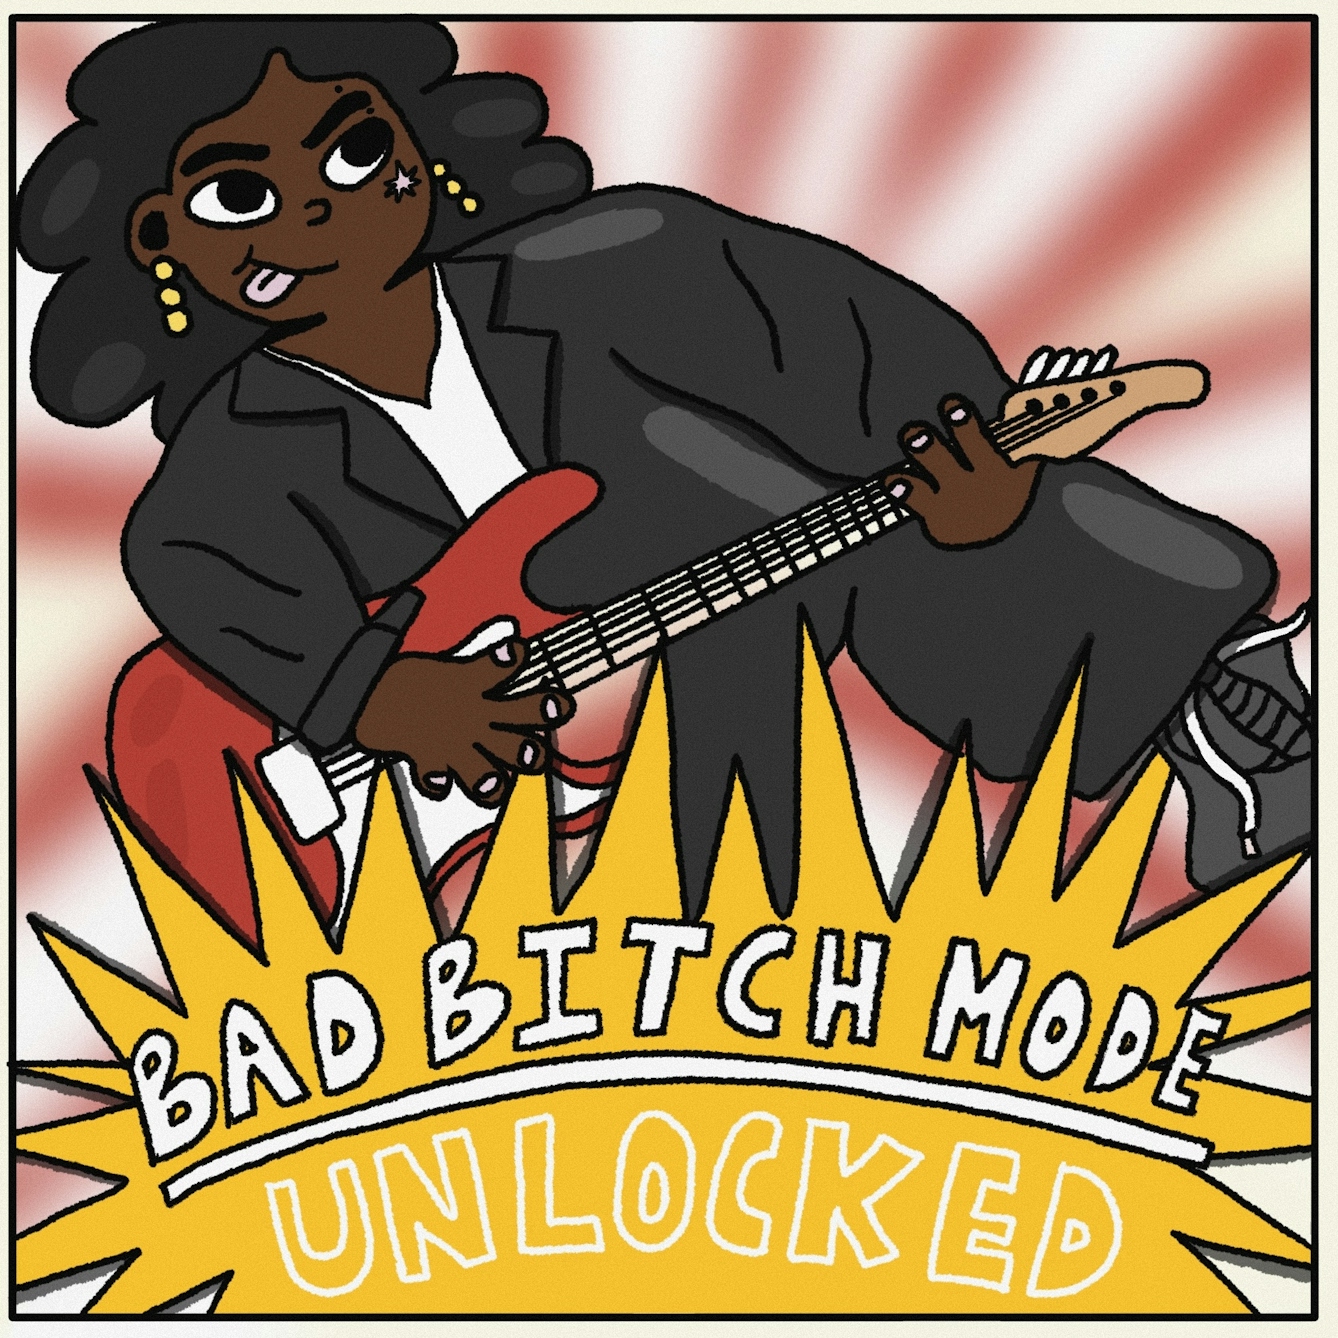 Panel 4 of a digitally drawn, four-panel comic titled ‘Winning’. Your character has levelled up. In big, bold letters it reads: “BAD BITCH MODE UNLOCKED”. Your character is celebrating, wearing their new earrings which they have not reacted to, and playing their guitar with a smile. 